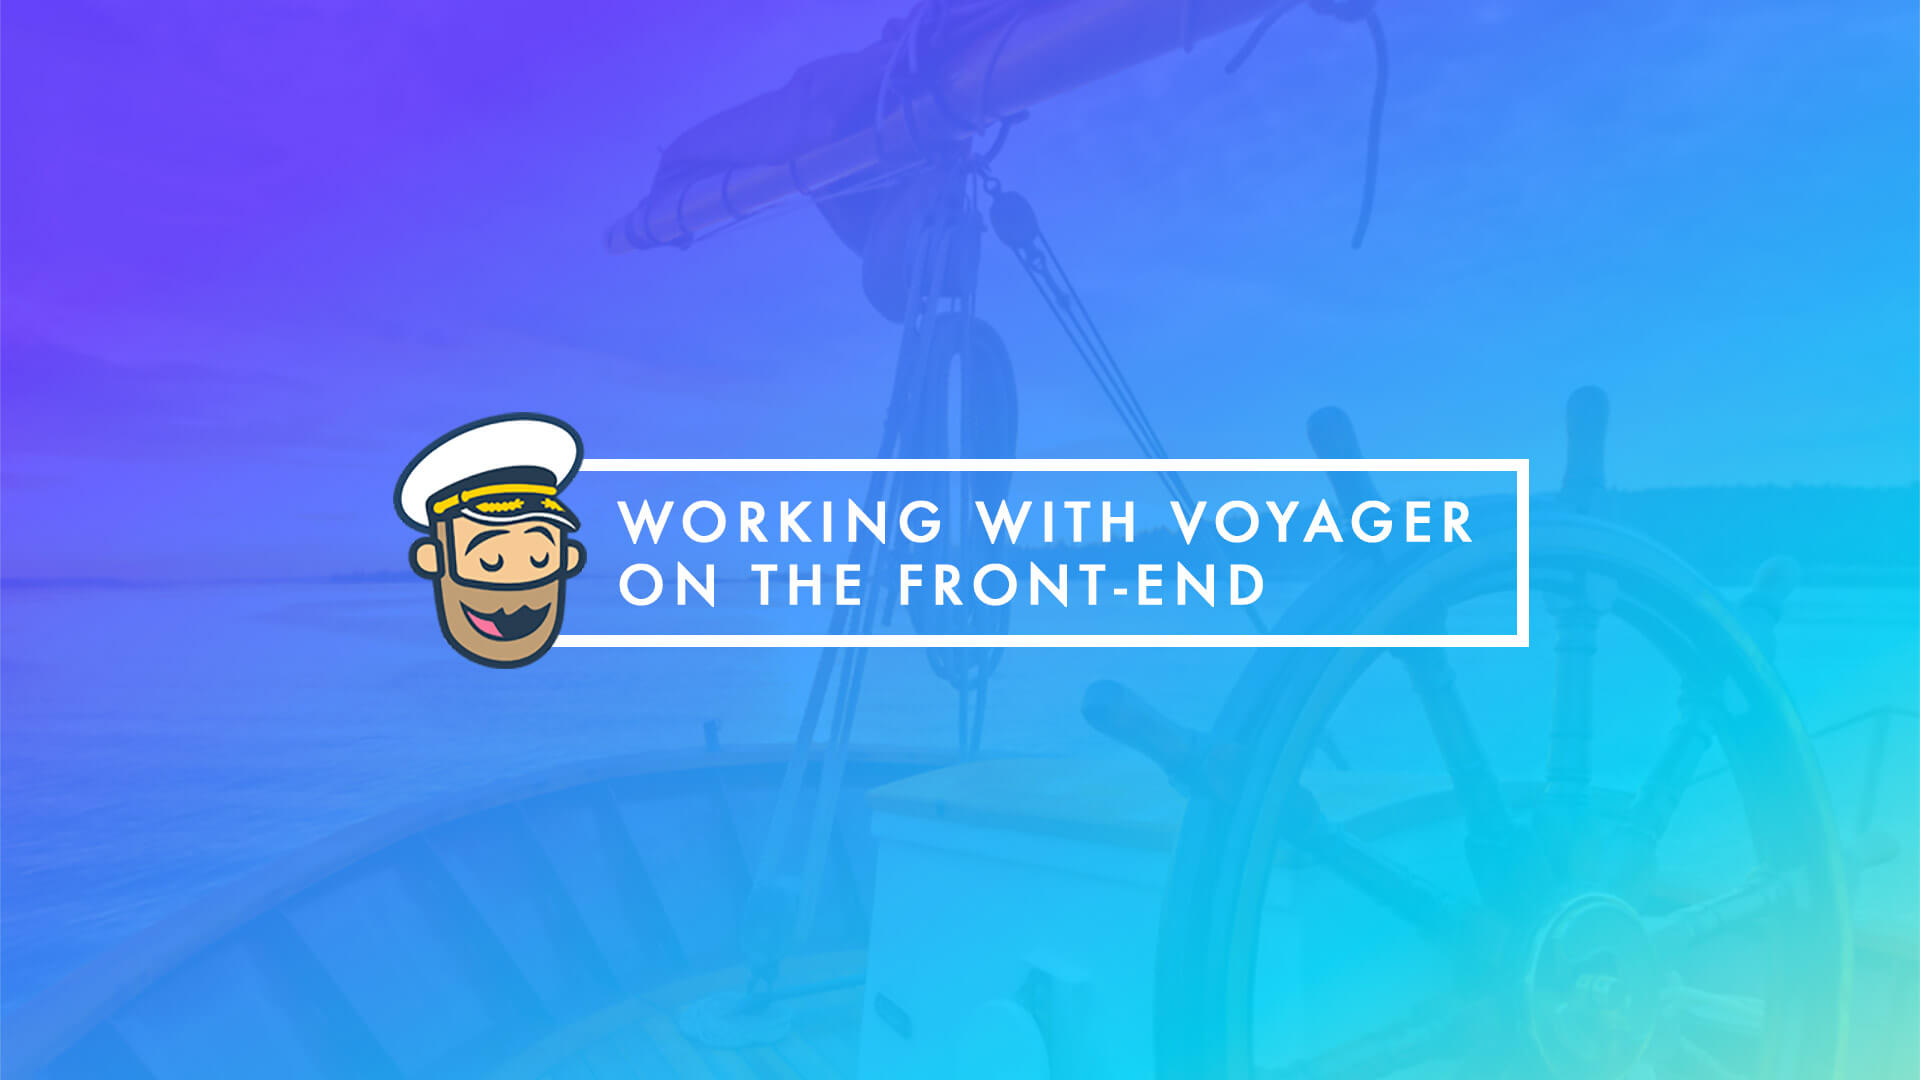 Working with Voyager on the Front-end